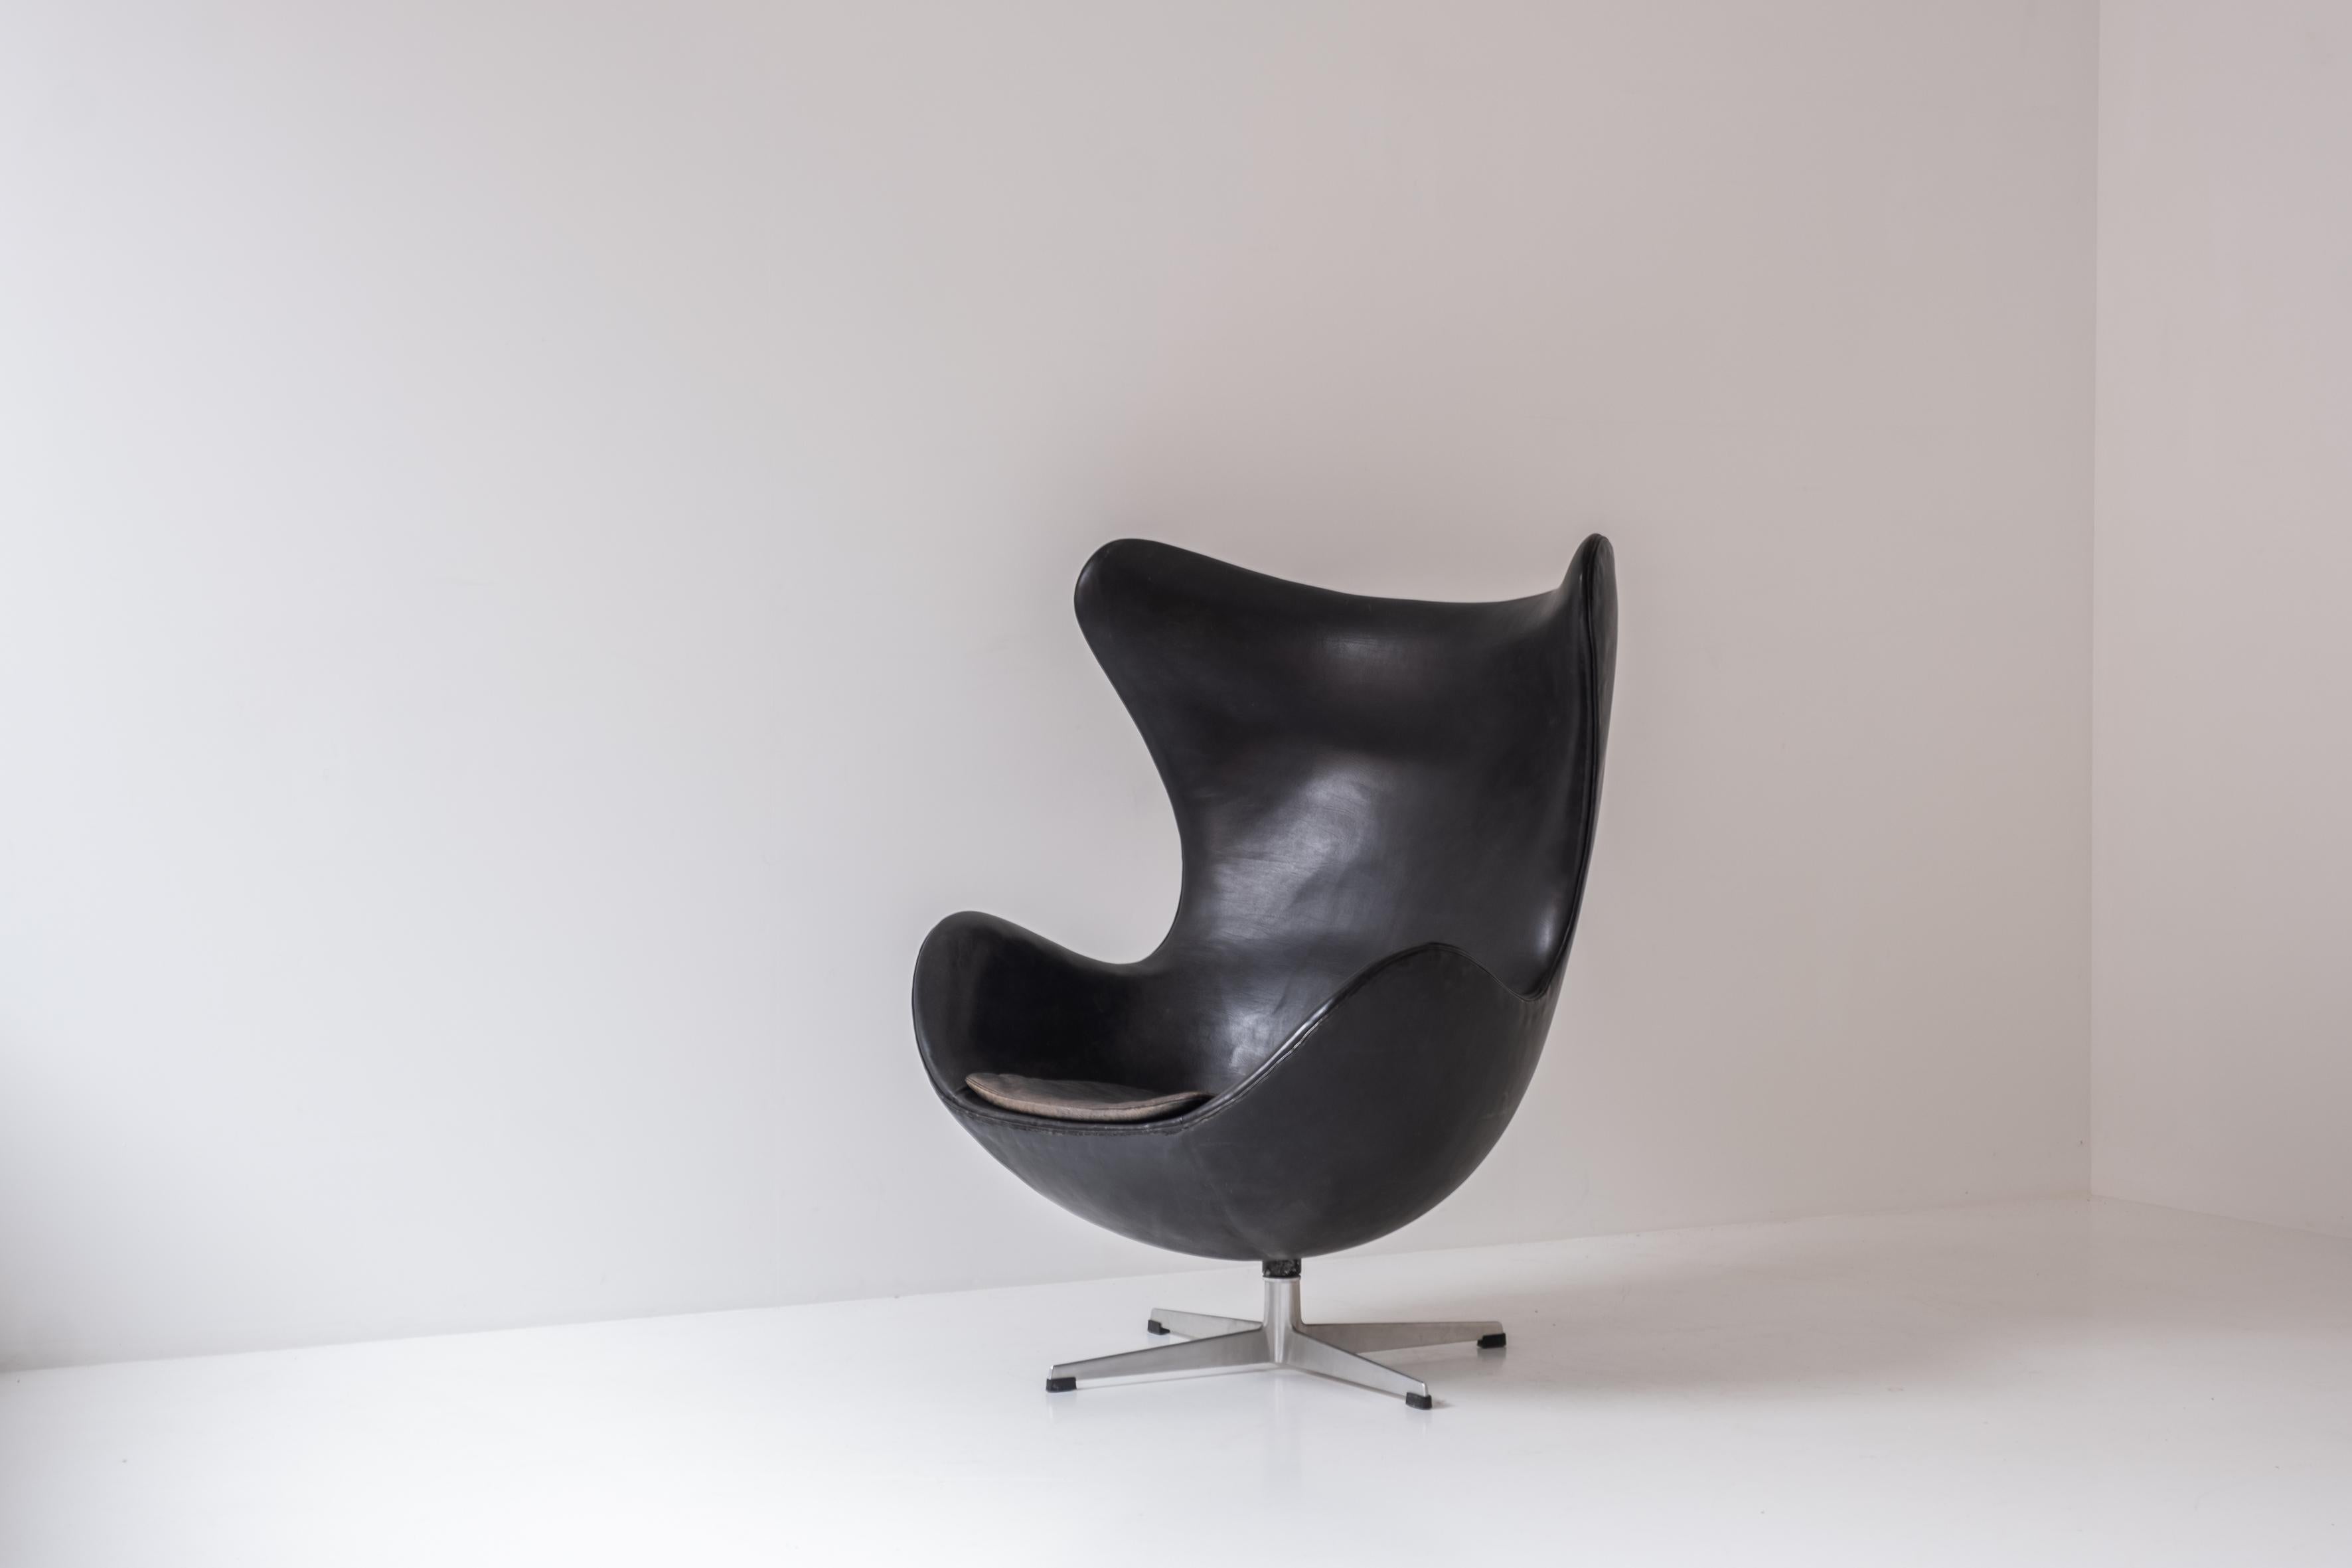 Early ‘Egg’ armchair by designed by Arne Jacobsen for Fritz Hansen, Denmark 1958. This piece features the original black leather upholstery and the first edition alumium base. Arne Jacobsen designed and built the Royal Hotel in Copenhagen and also